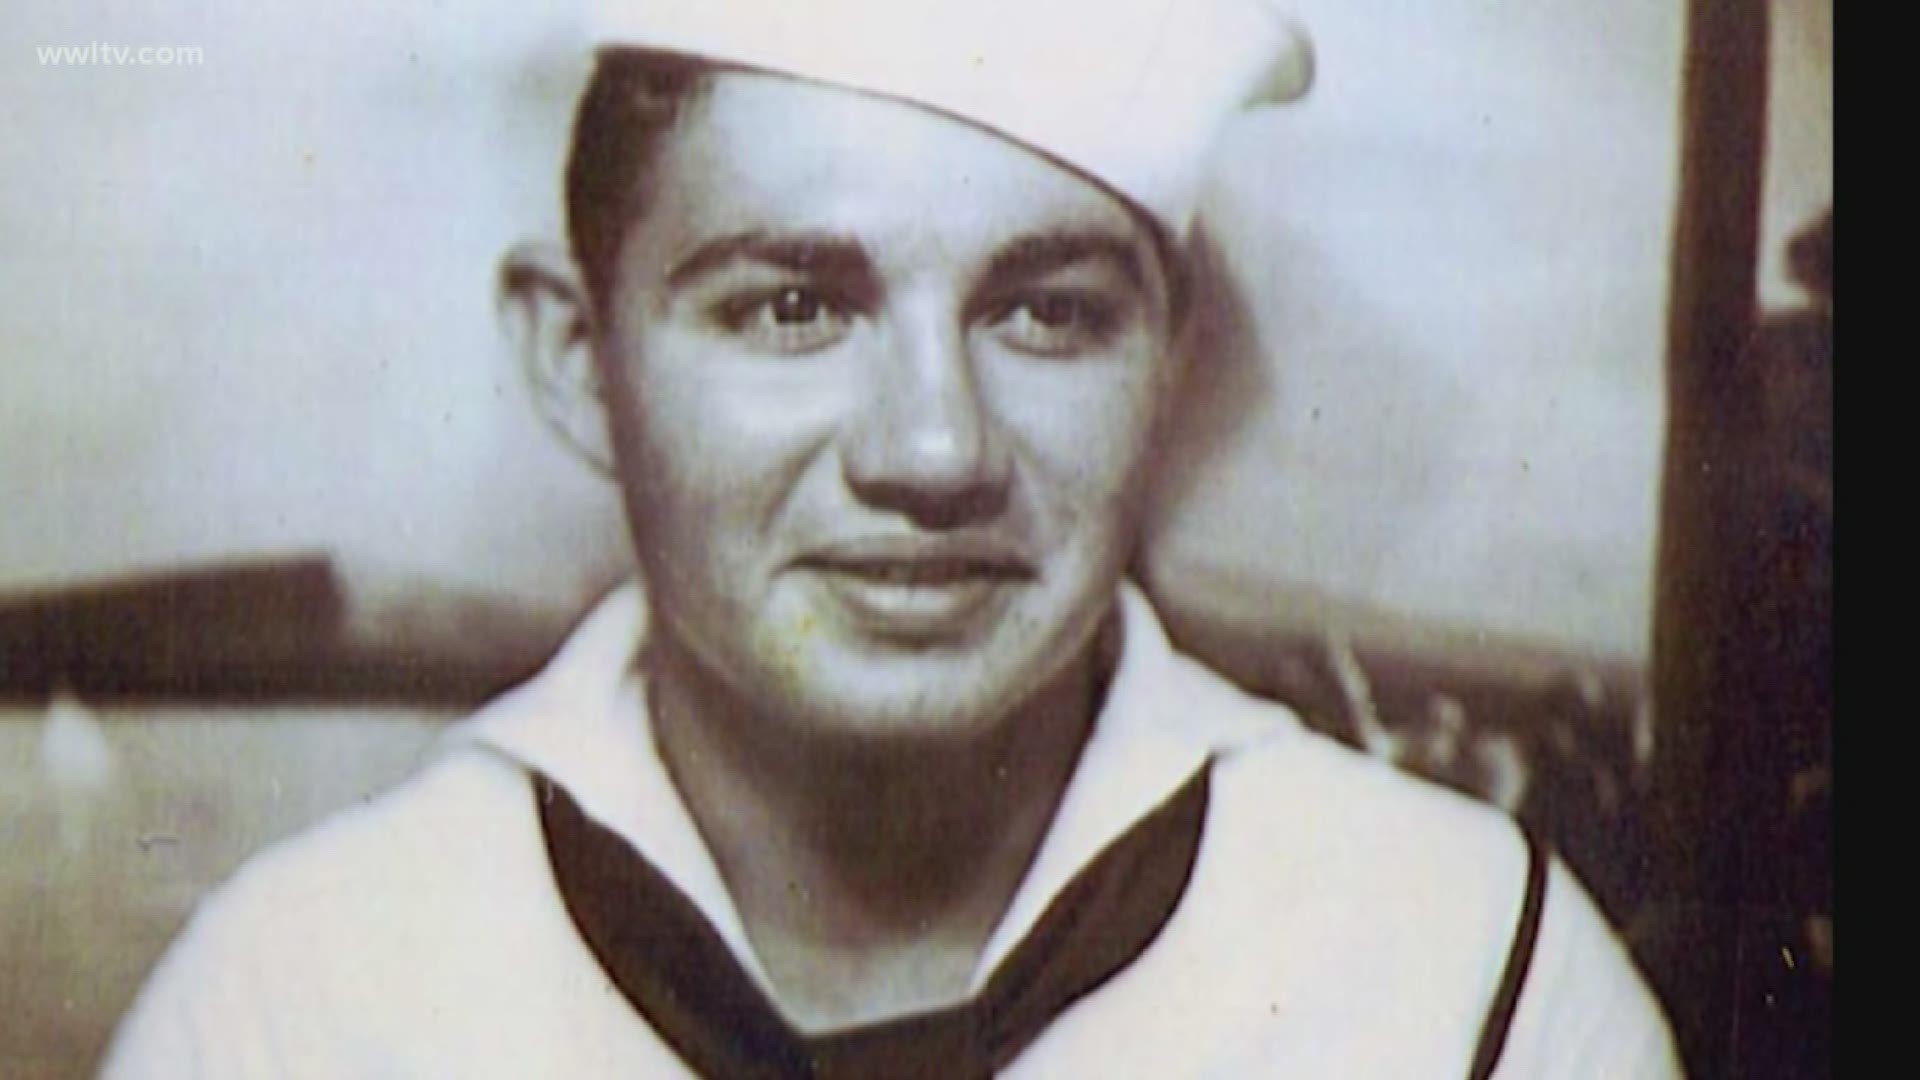 A man who was just 20-years-old when he lost his life in the attack on Pearl Harbor has been identified, 77 years later. On Monday, he was buried in Slidell with full military honors.